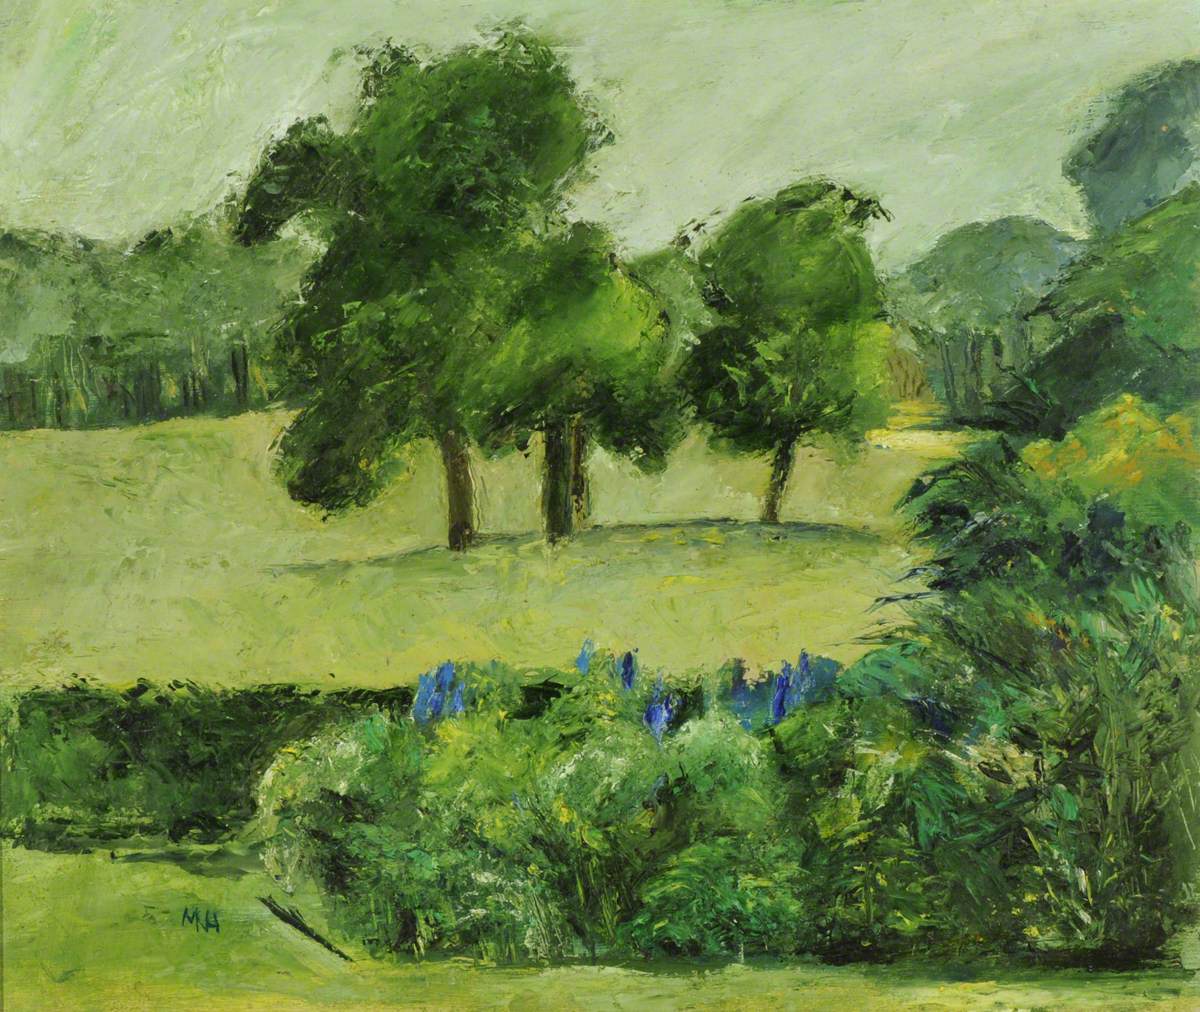 Landscape with Trees in a Park and Shrubbery in the Foreground